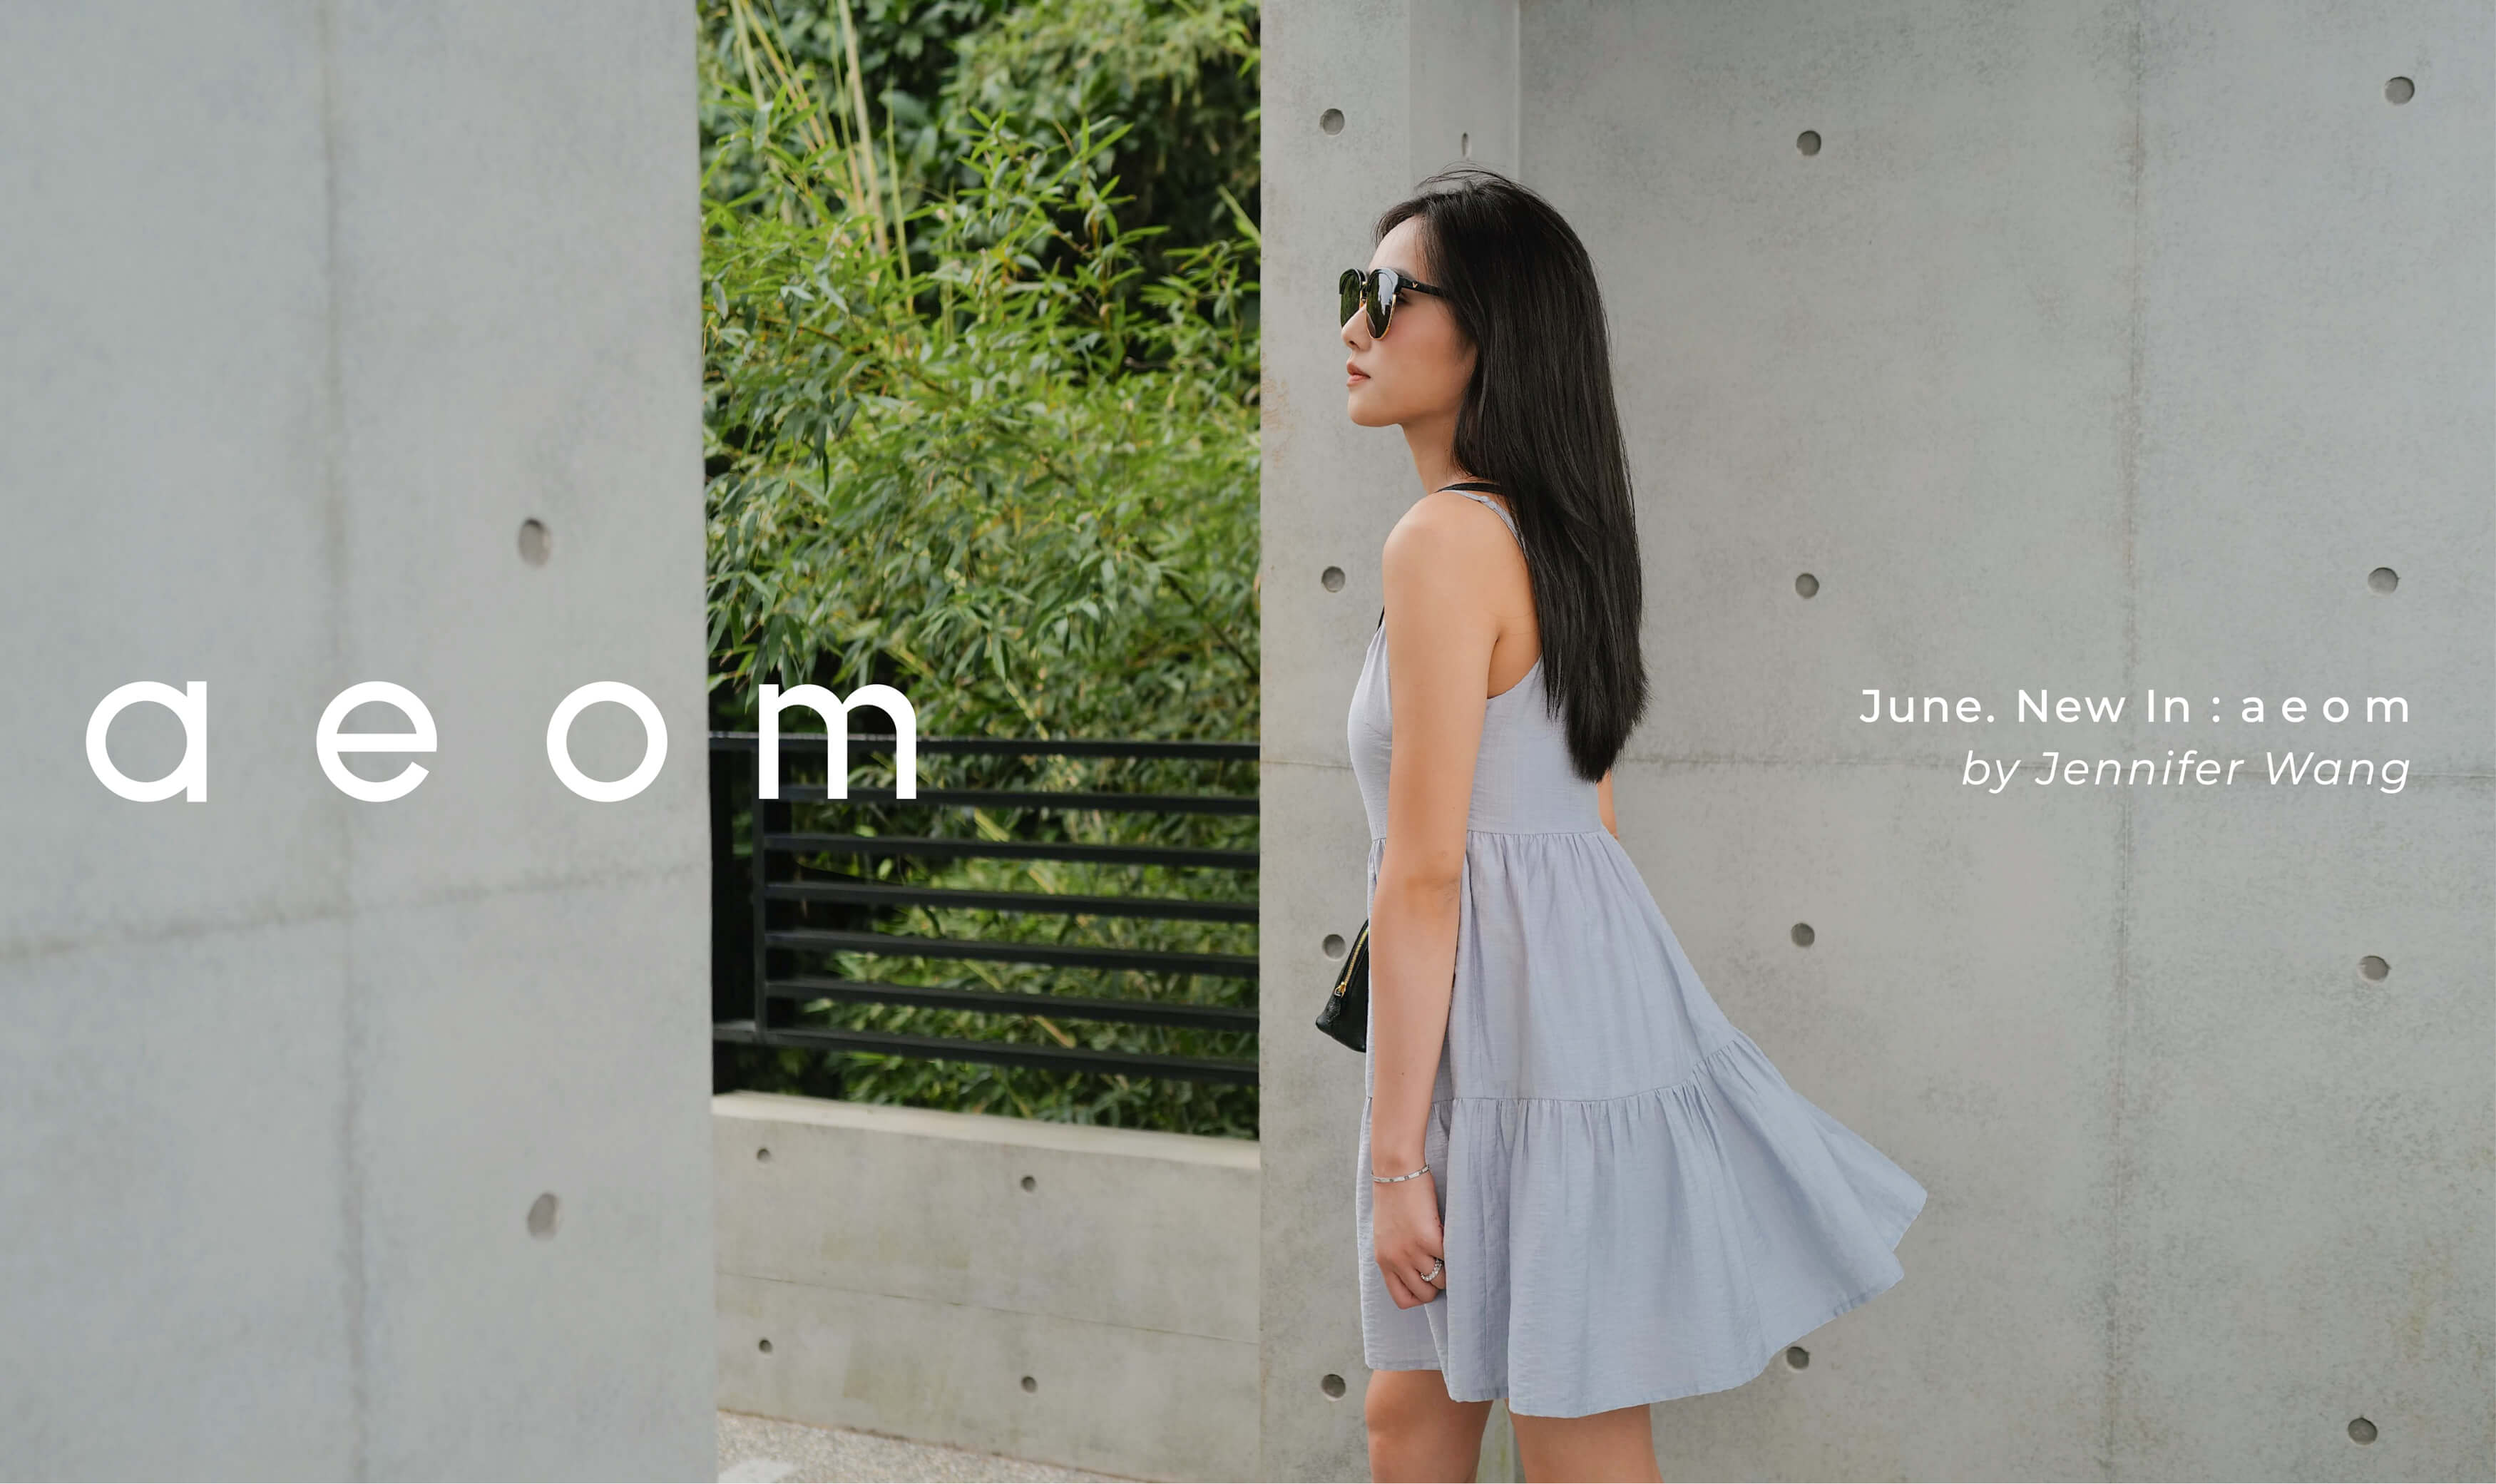 New In | aeom June. Collection